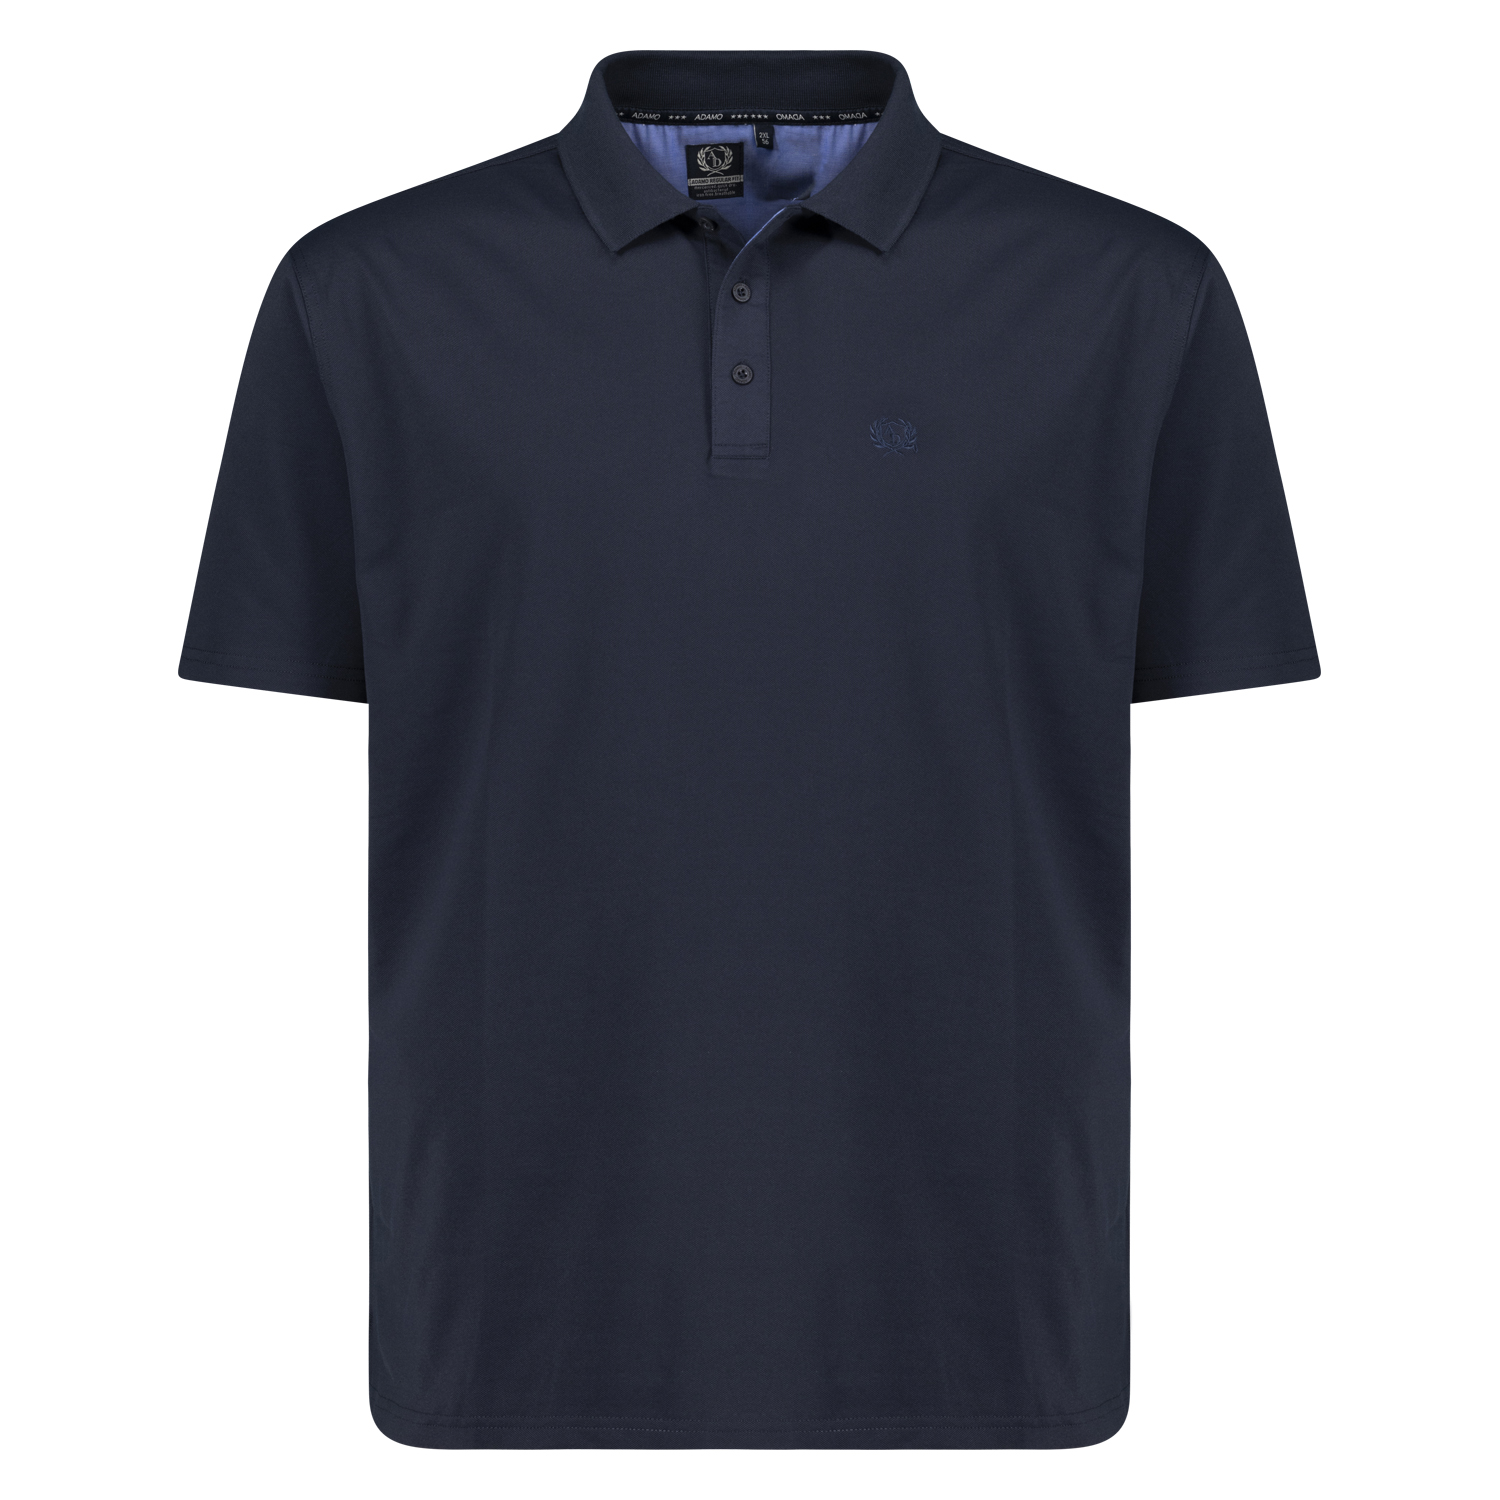 Short sleeve polo shirt PICCO navy by ADAMO for men in large sizes up to 12XL